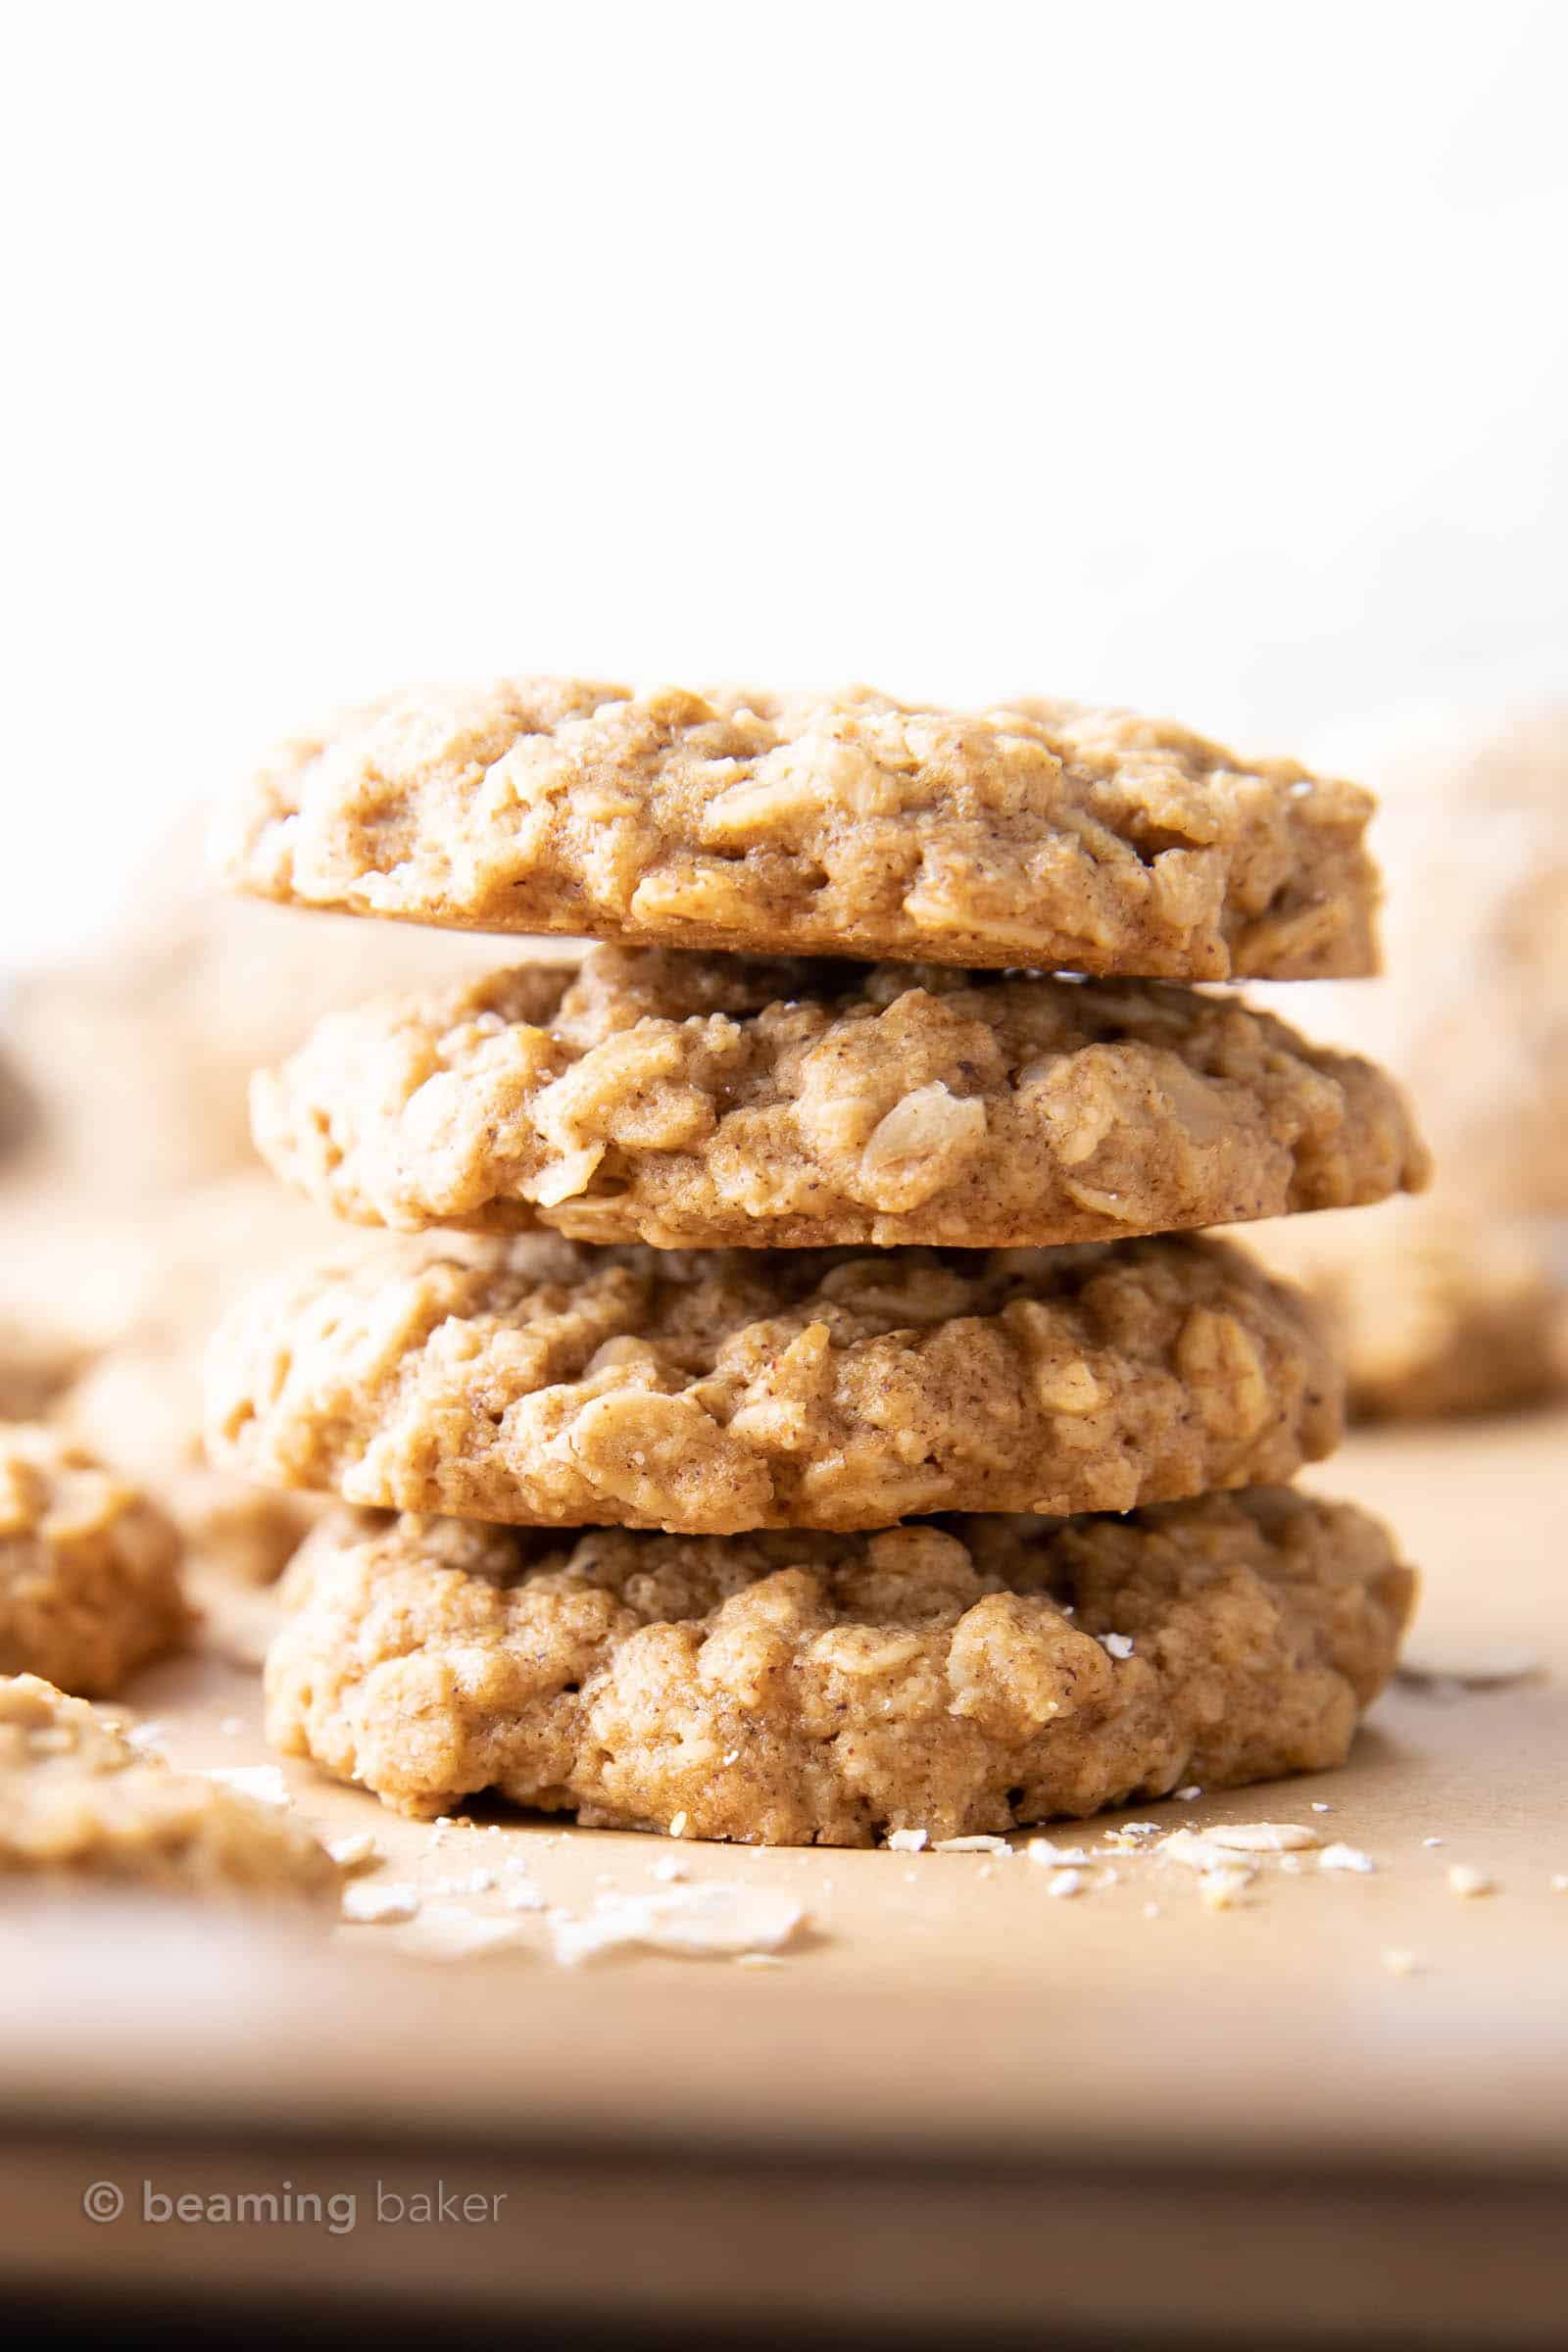 Healthy Oatmeal Cookies: this healthy oatmeal cookie recipe yields lightly sweet healthy oatmeal cookies with spiced, buttery-rich flavor, lightly crispy edges and a tender moist, interior. #Healthy #Oatmeal #Cookies | Recipe at BeamingBaker.com